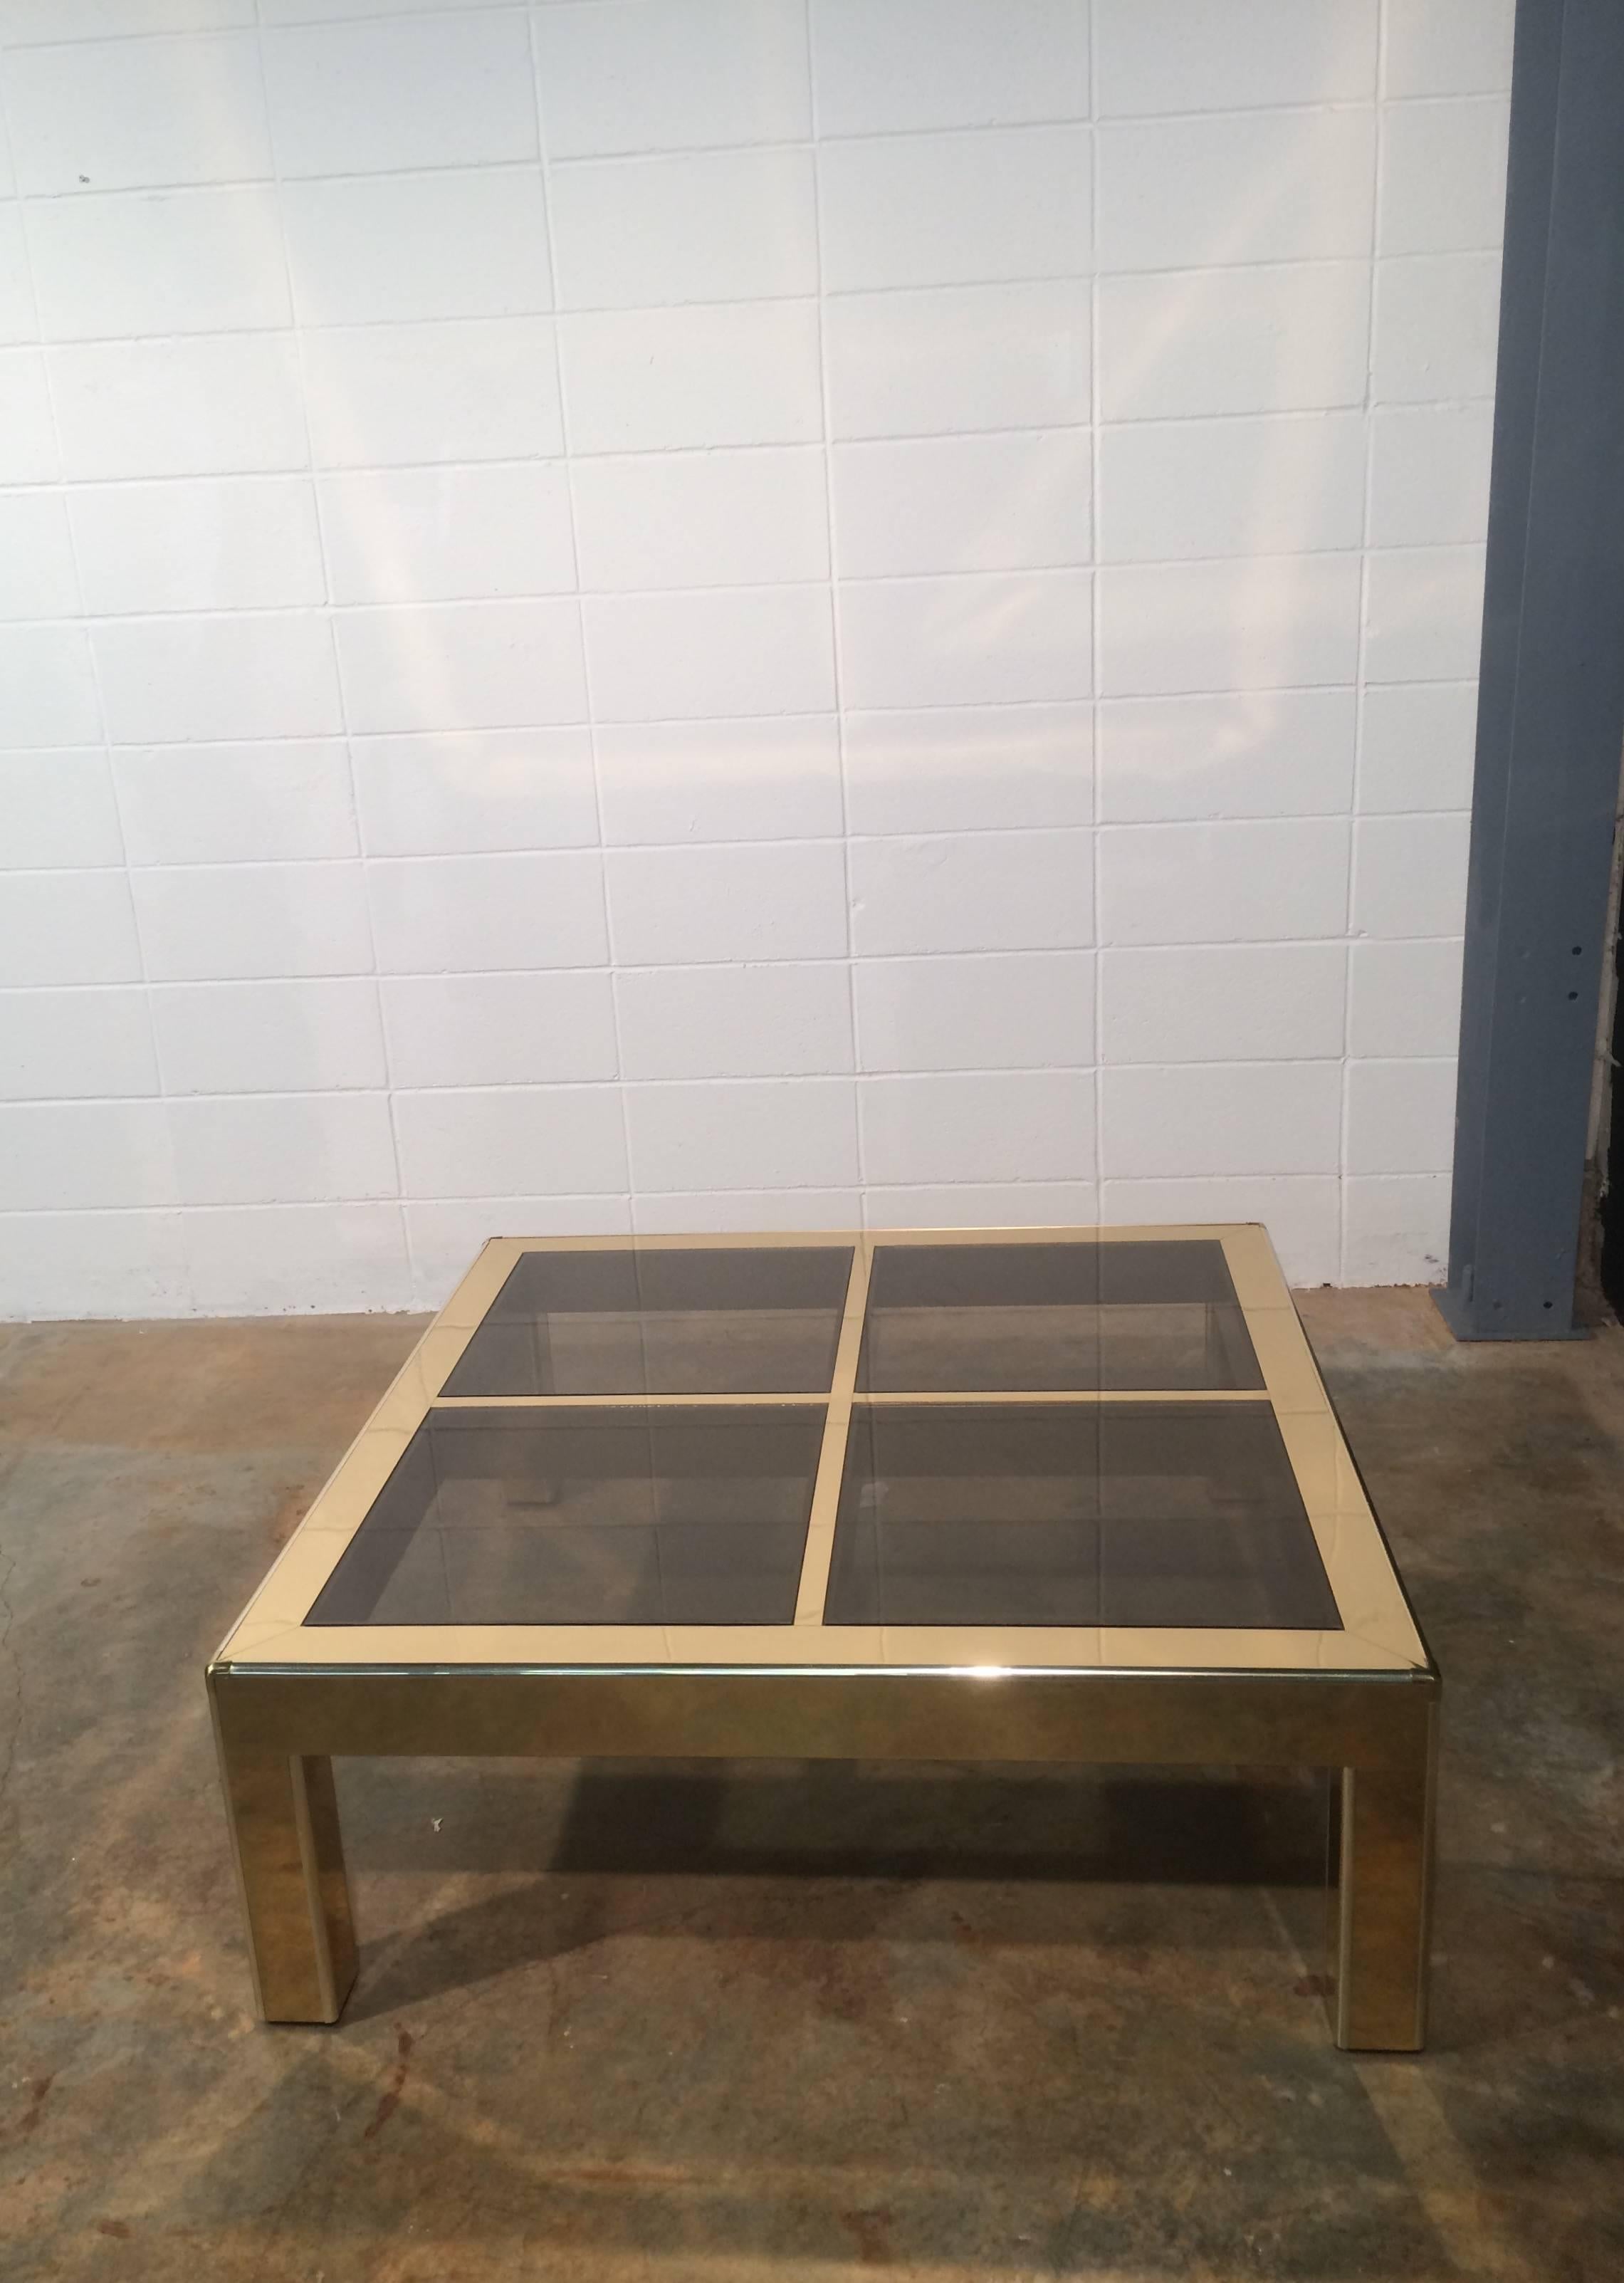 Sleek brass coffee table with tinted glass inserts by Mastercraft. Table is in great condition with very minimal wear. All of the glass is new and scratch free. Retains the Mastercraft label. 42